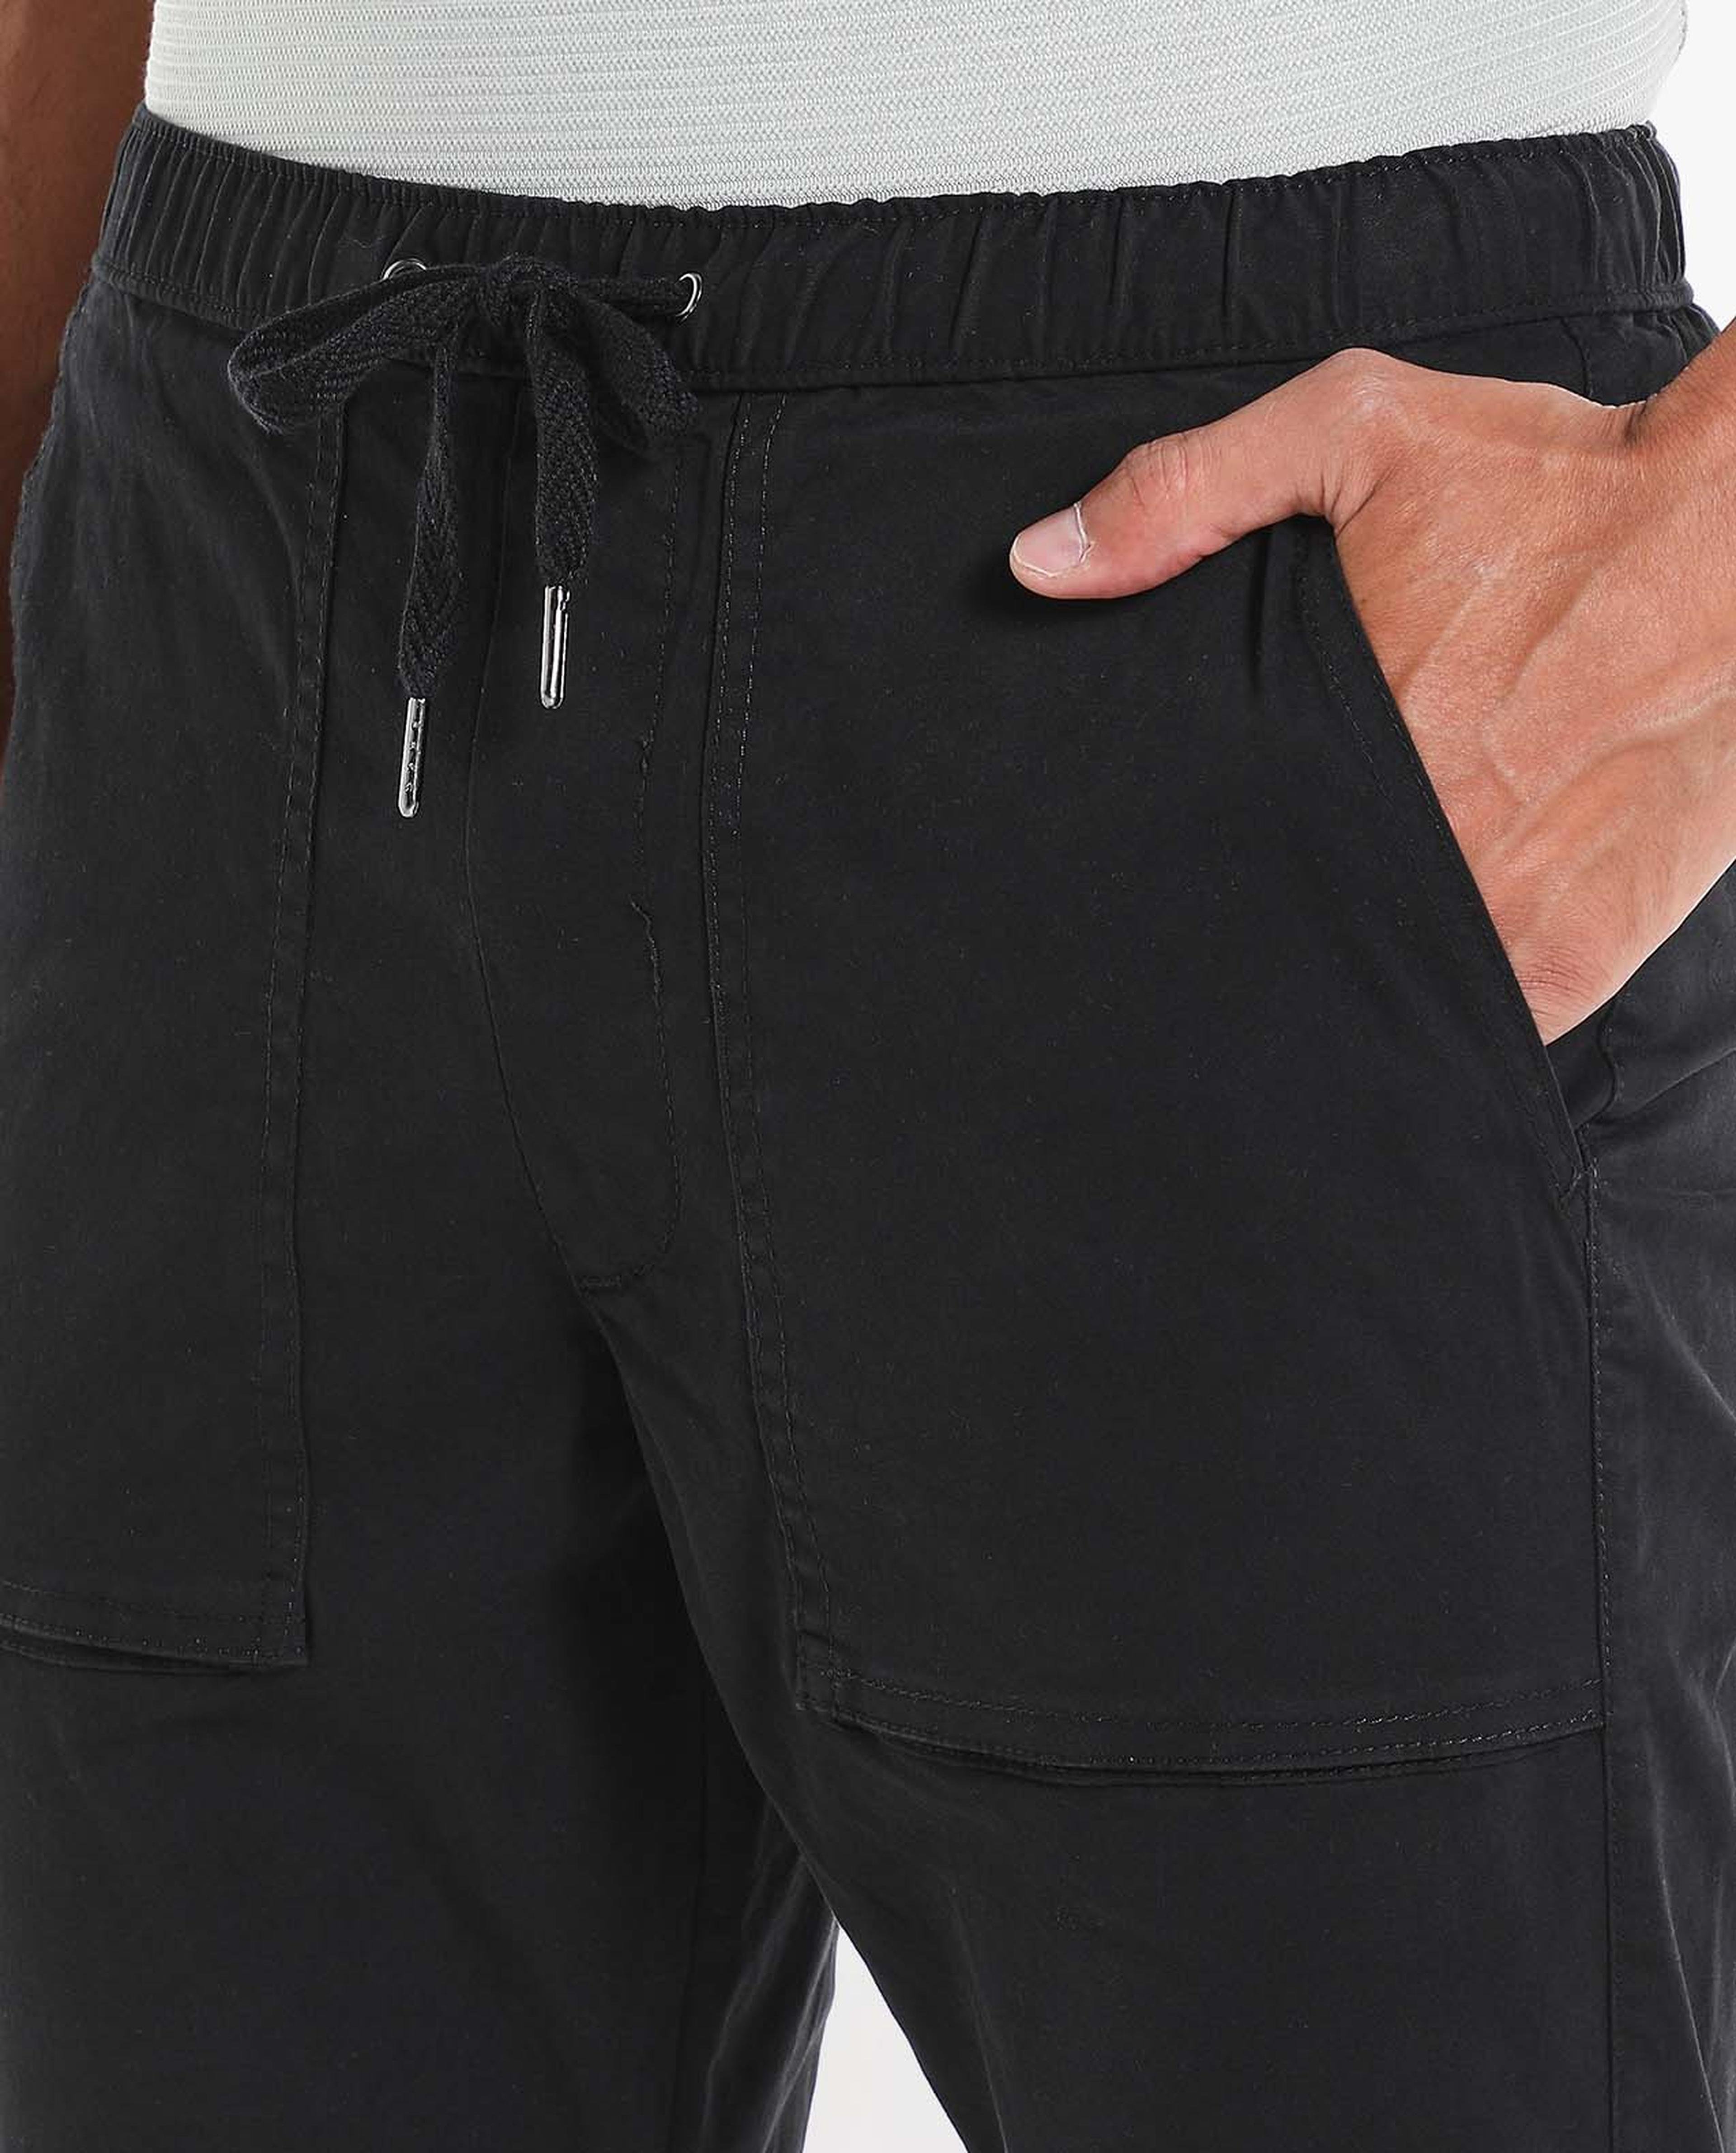 Solid Joggers Style Pants with Elasticated Drawstring Waist